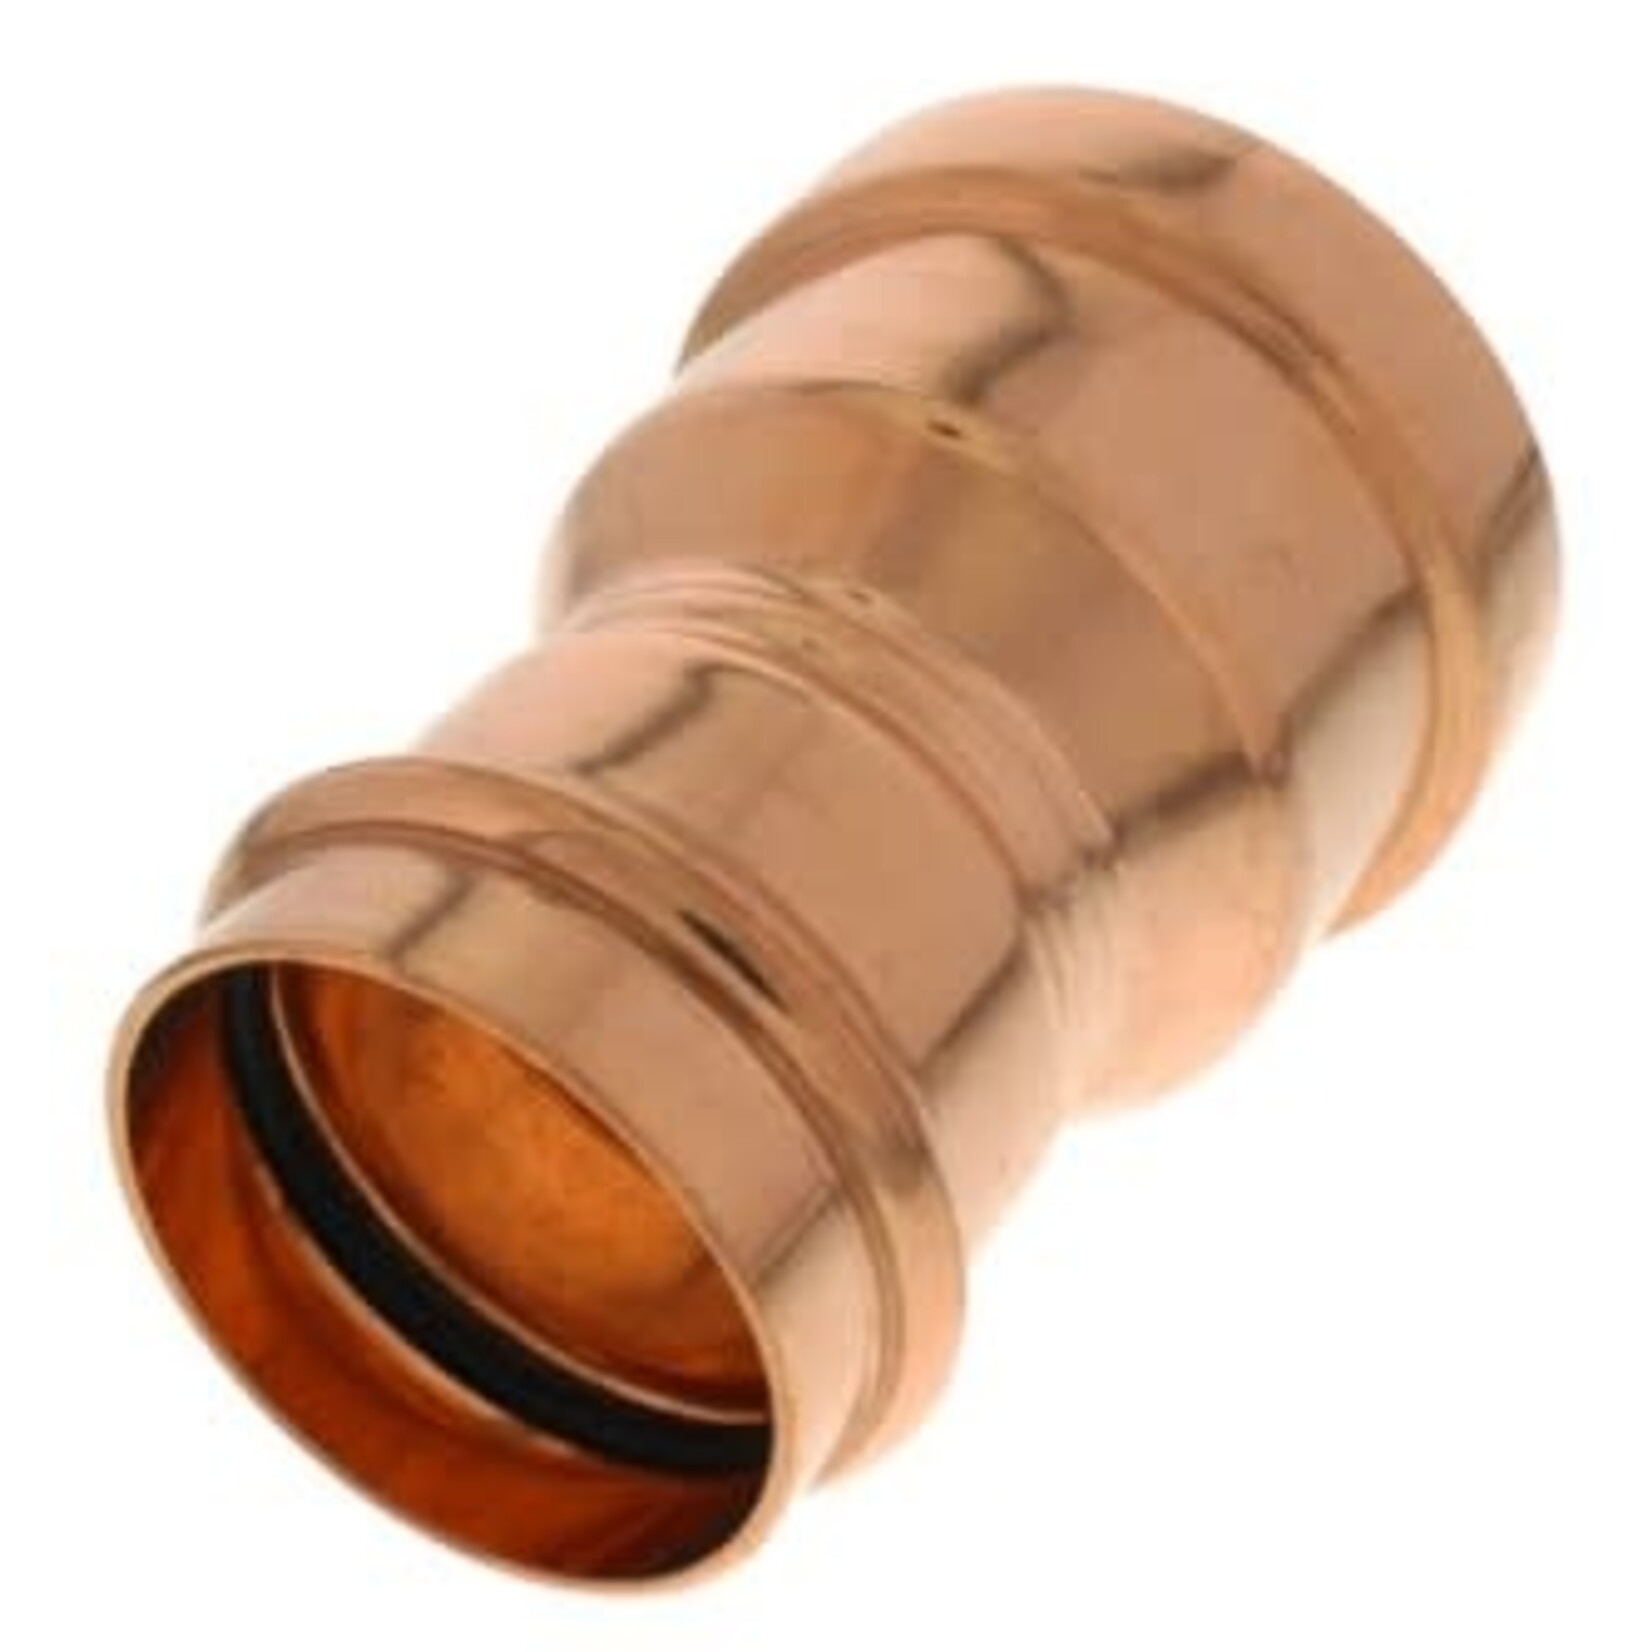 NDL 2 1/2 IN X 2 IN PROPRESS REDUCER COUPLING